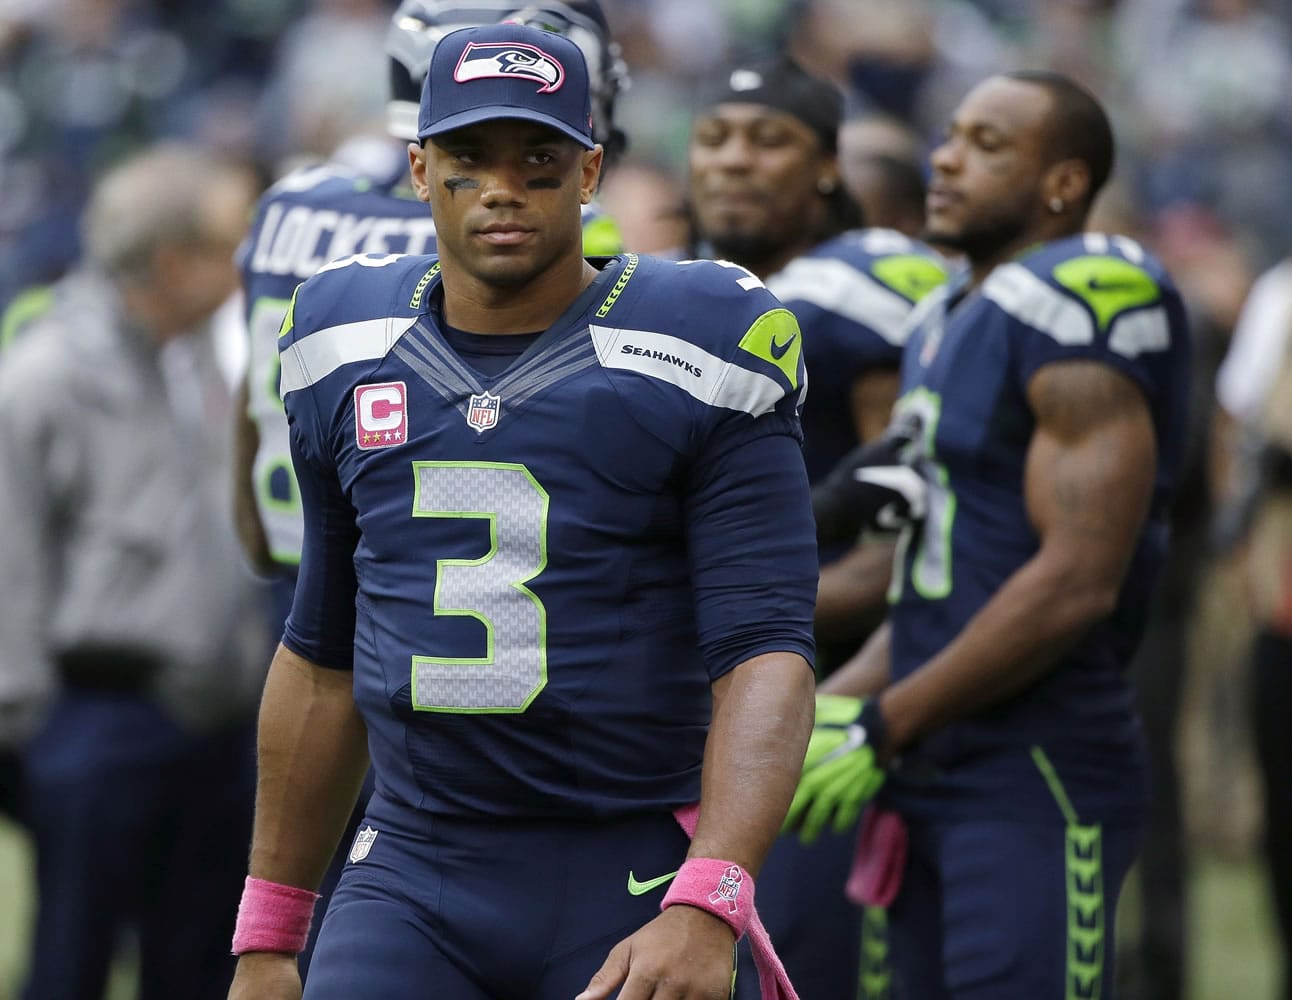 Seattle Seahawks quarterback Russell Wilson shows frustration on his face late in the second half Sunday as the Seahawks went on to lose to the Dallas Cowboys 30-23.